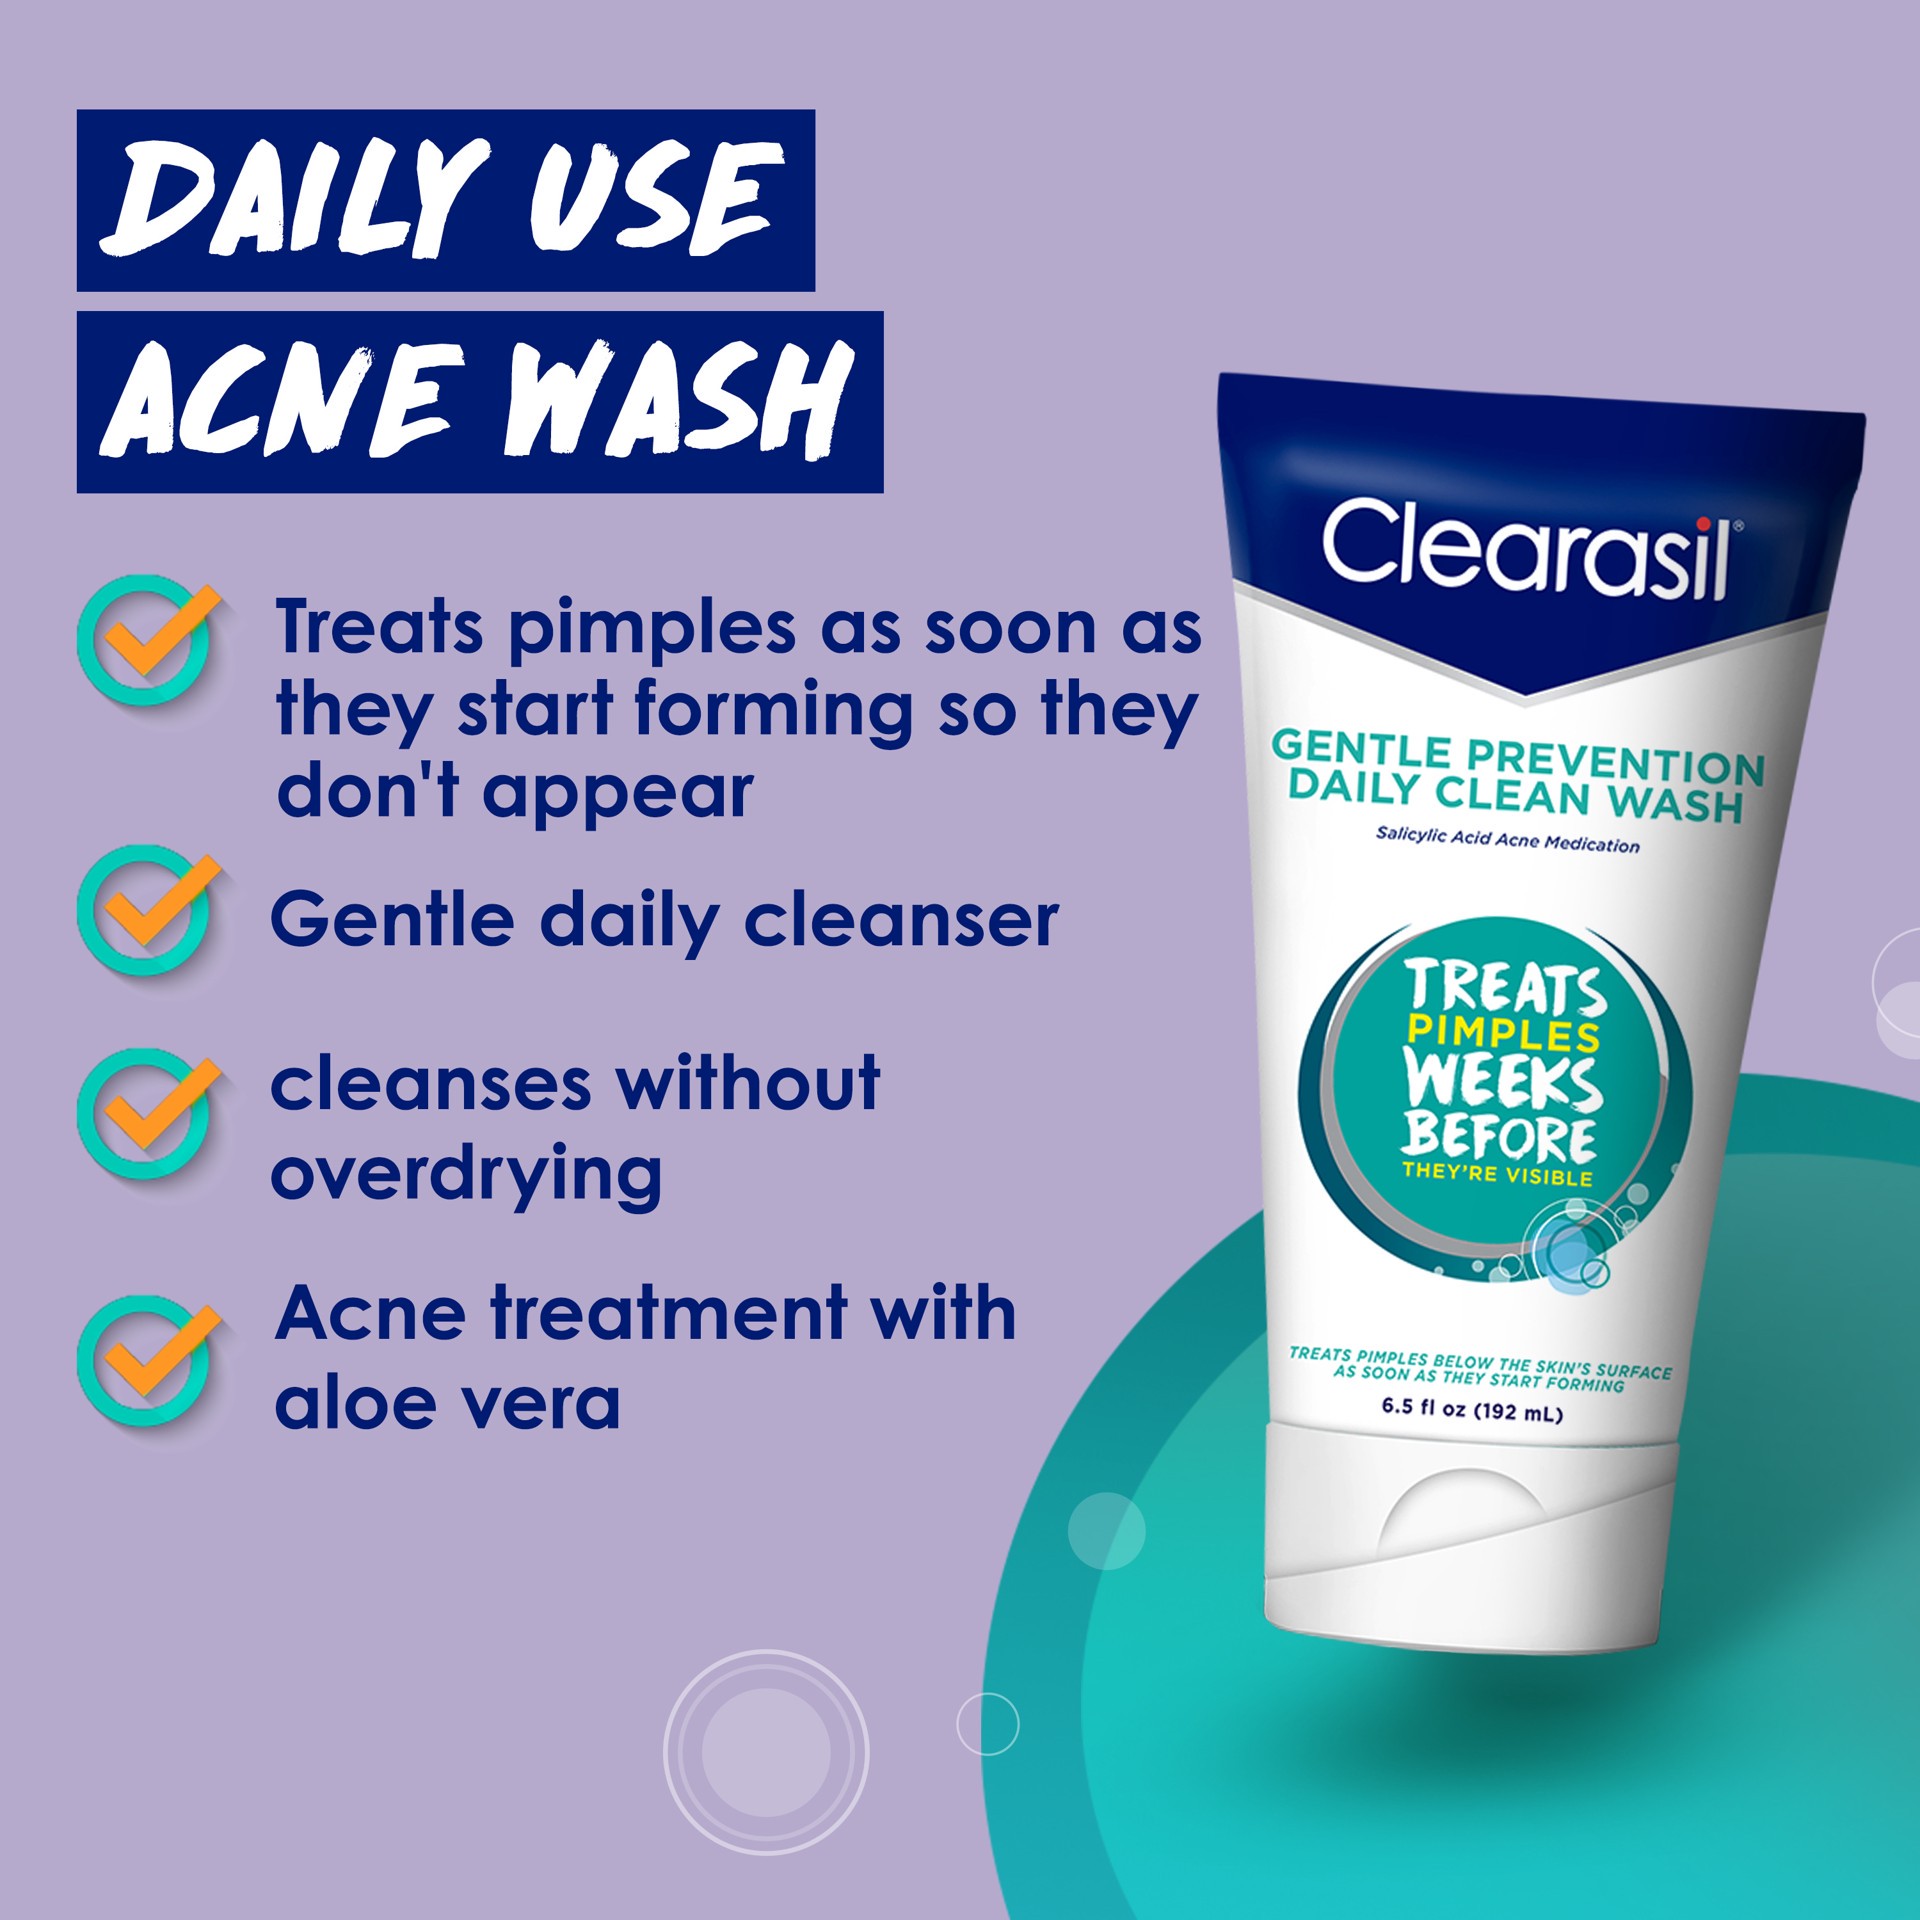 slide 5 of 5, Acne Treatment Face Wash - Clearasil Gentle Prevention Daily Clean Wash with Salicylic Acid Acne Medication, 6.5 fl oz, 6.50 fl oz